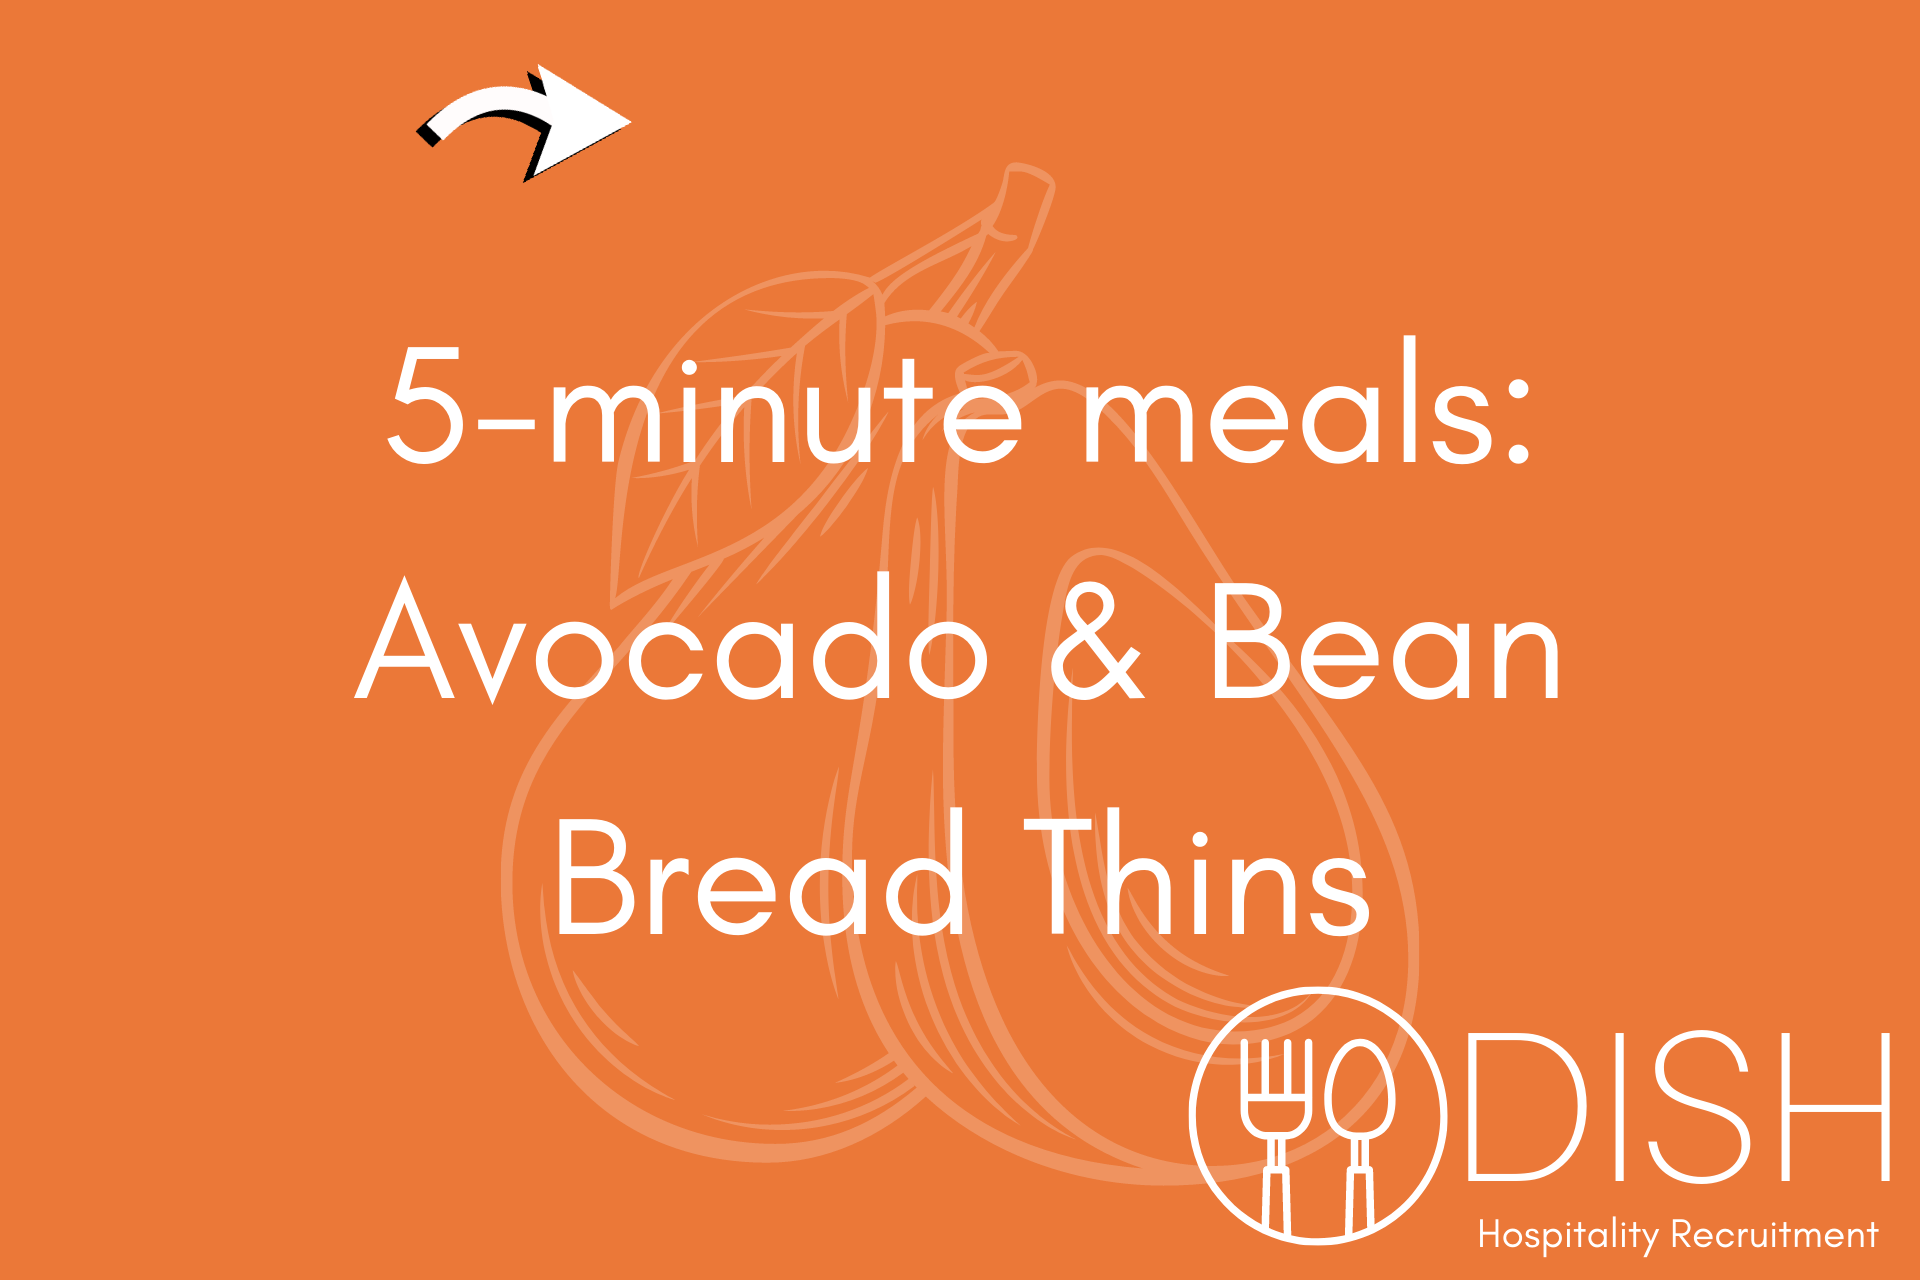 5 Minute Meal of the Week: Avocado & Bean Bread Thins